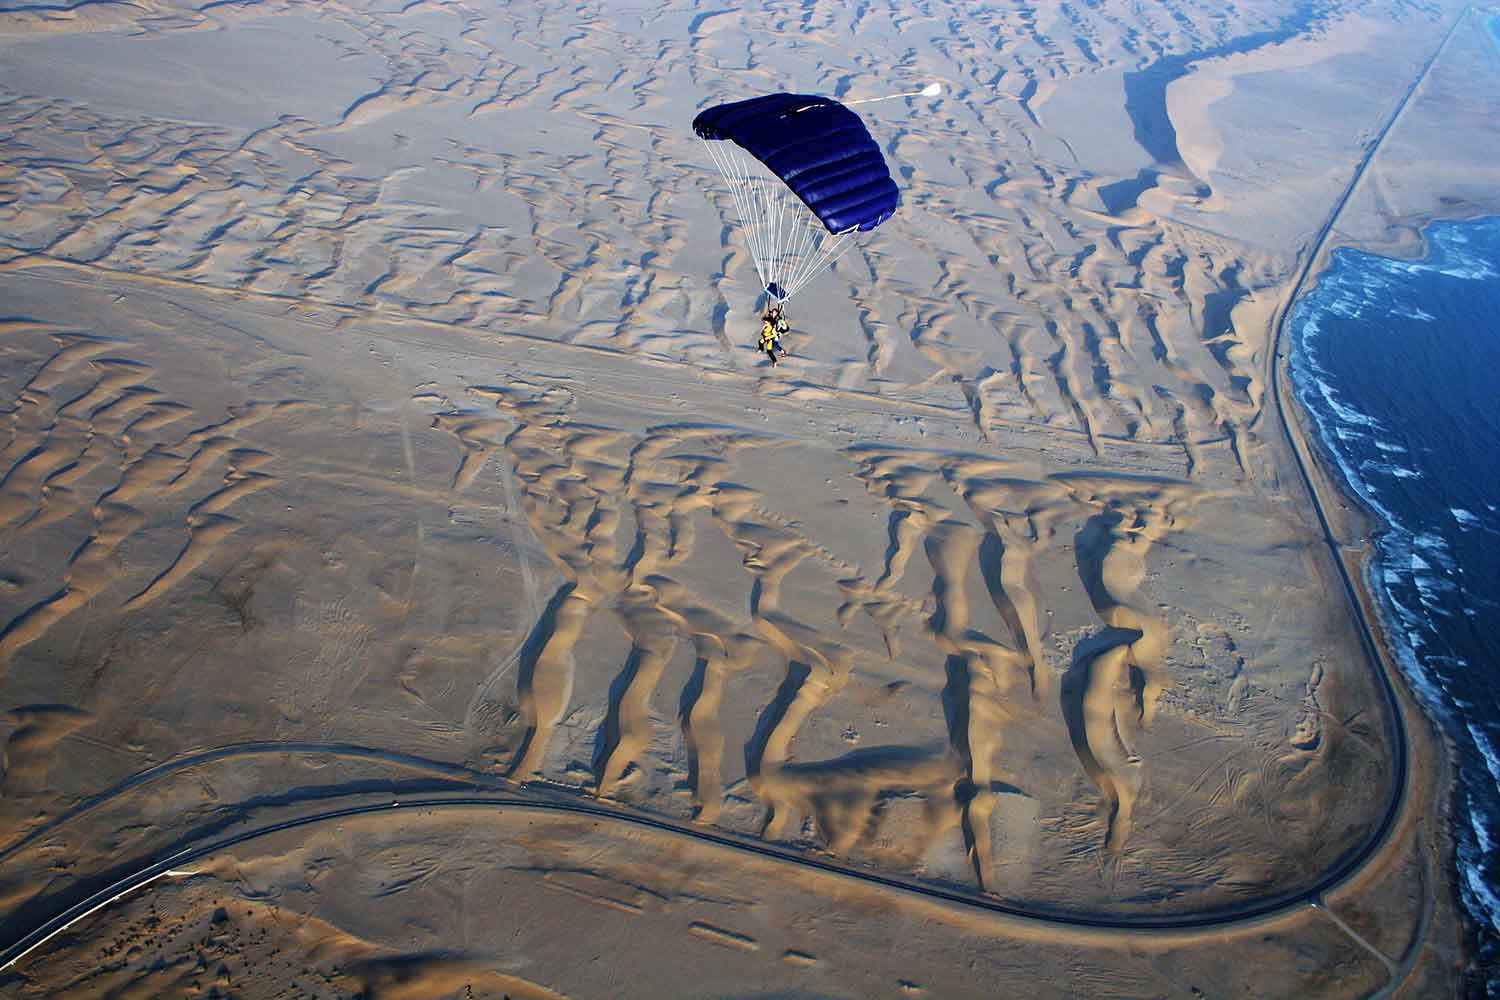 Lone parachute glides over the desert